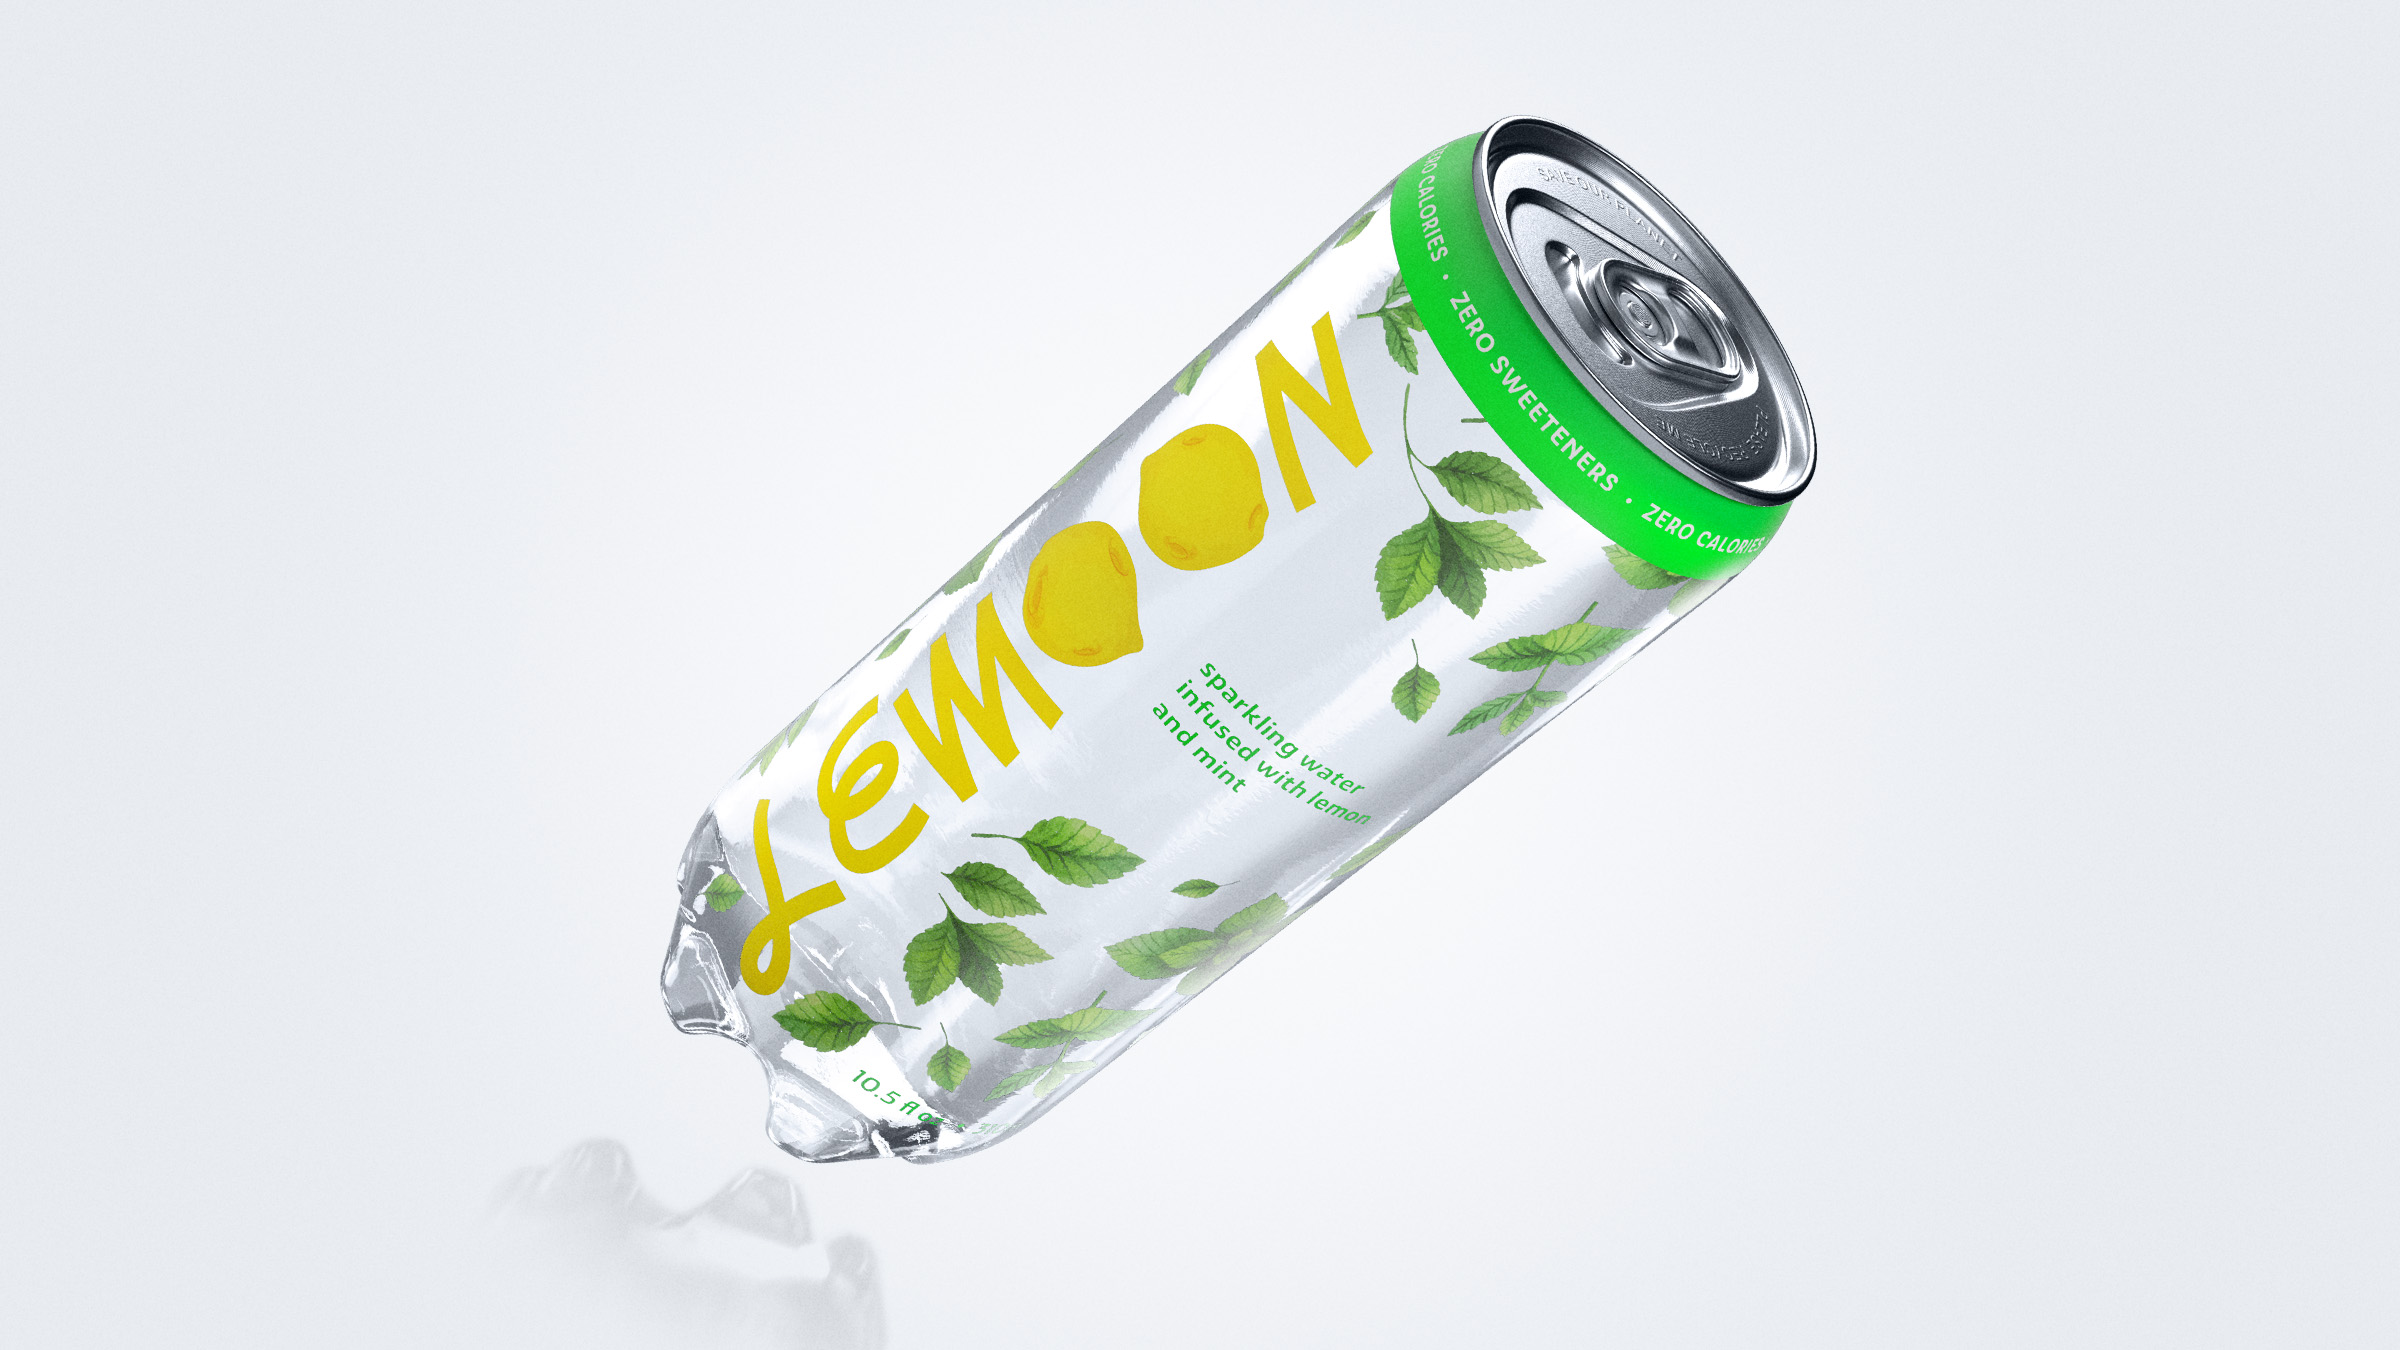 A Real Healthy and Eco-friendly Alternative To The Sugary Drinks by Lemoon